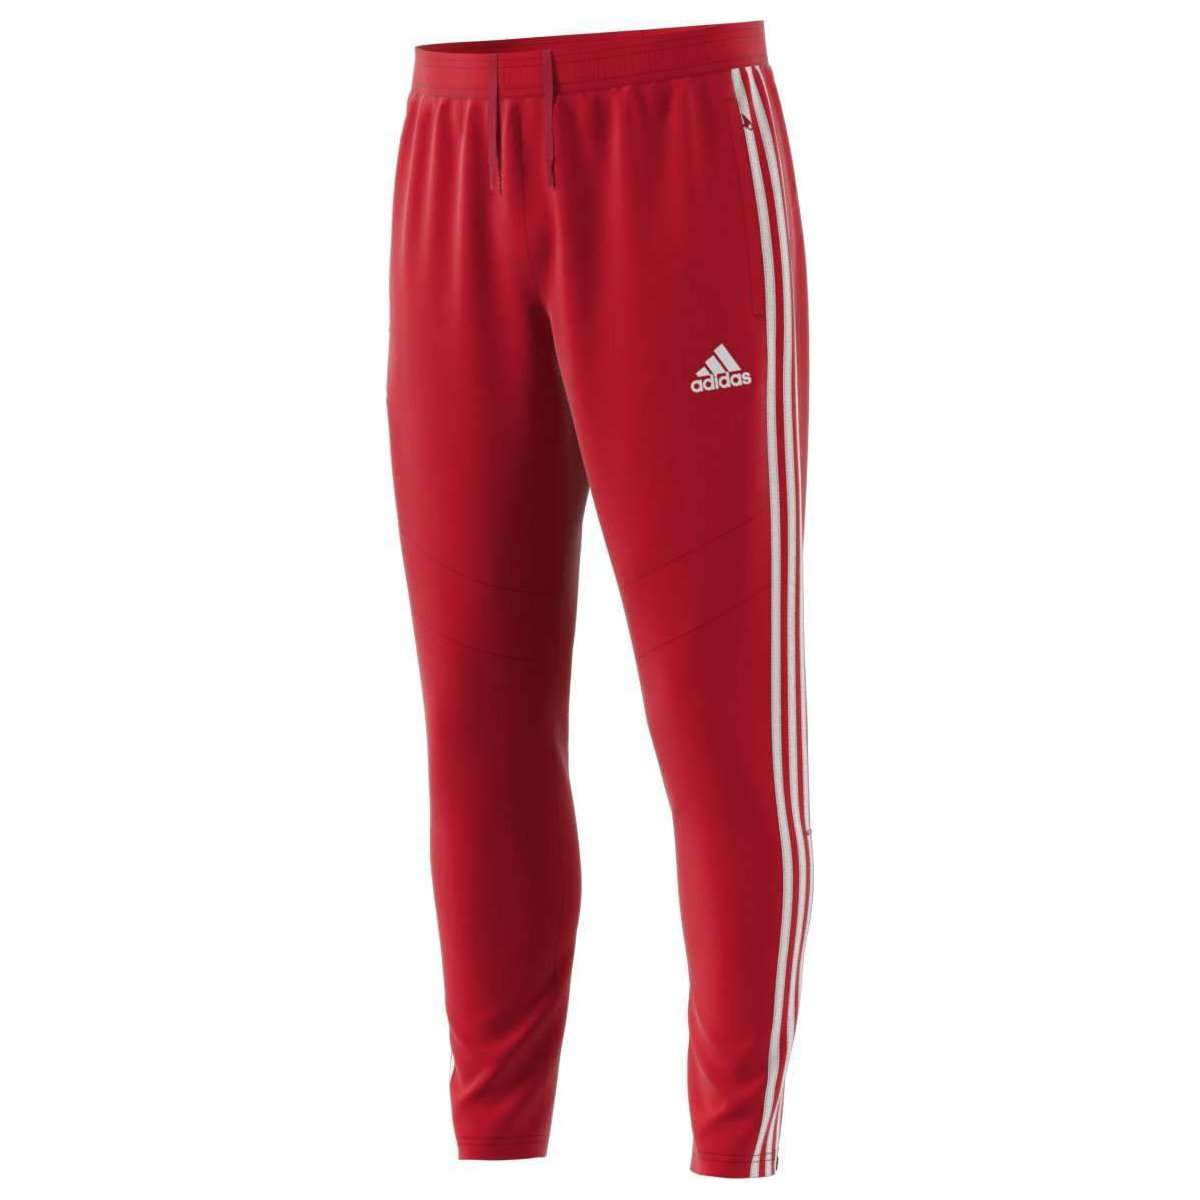 adidas power red pants